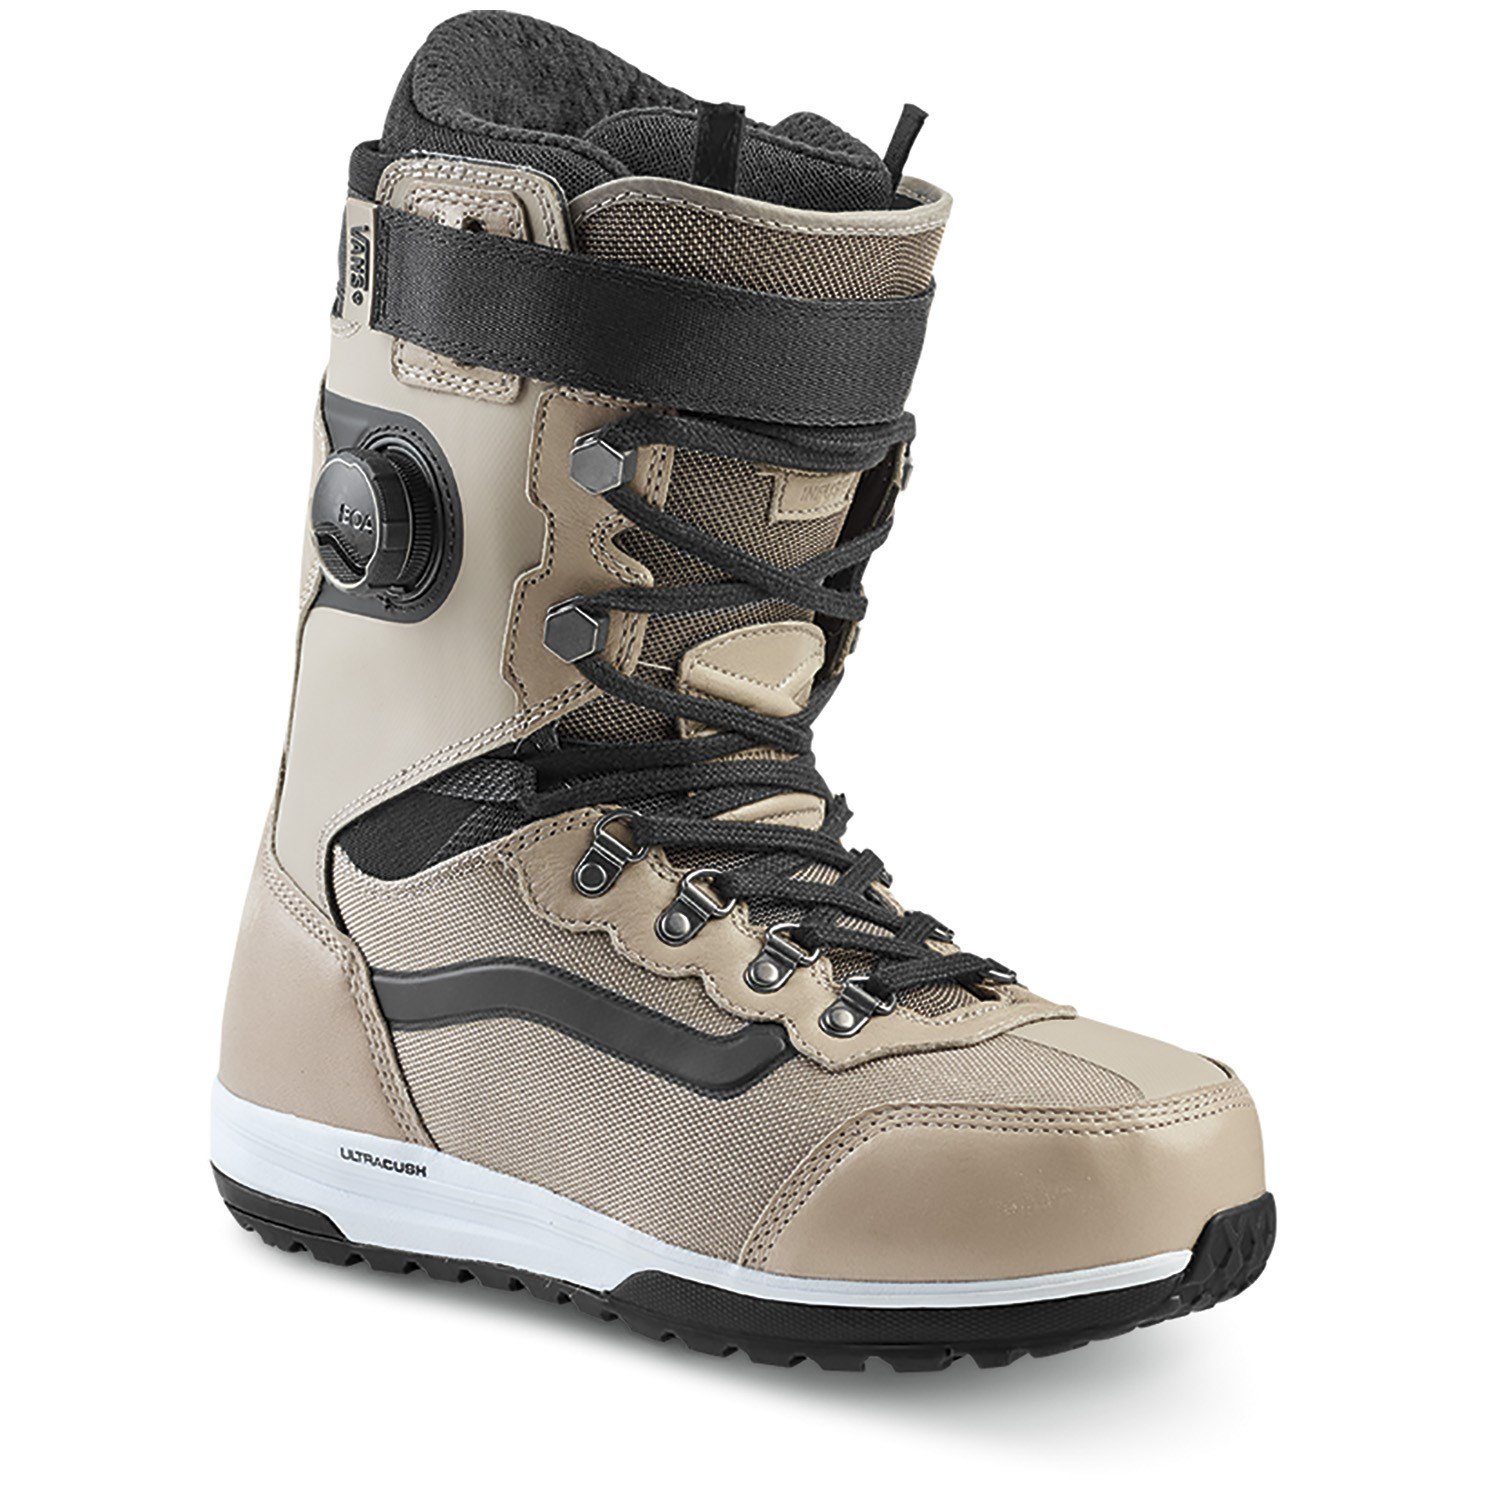 vans infuse snowboard boots review 